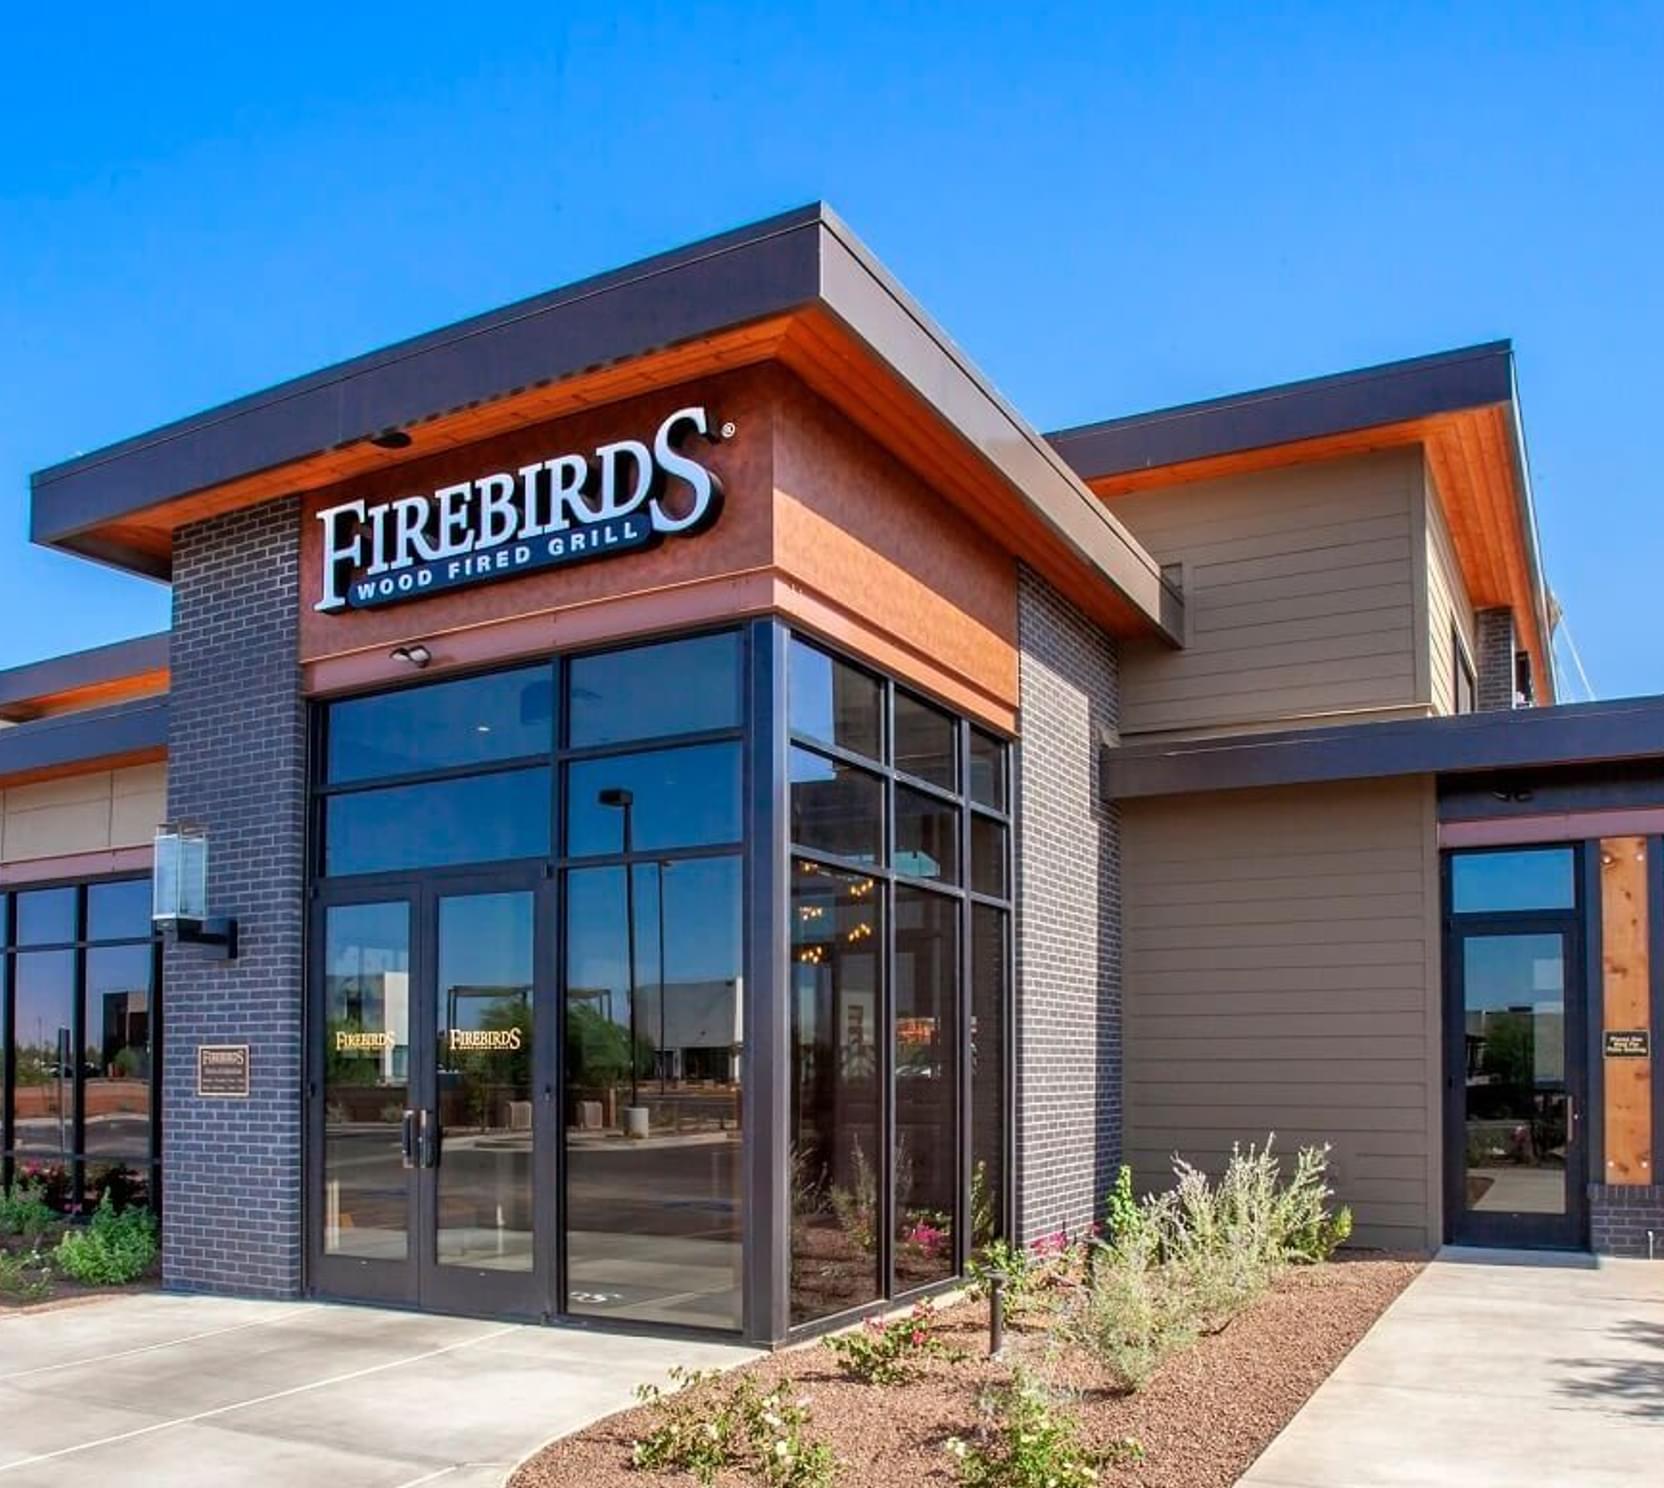 The exterior of Firebirds Wood Fired Grill Gilbertlocation.